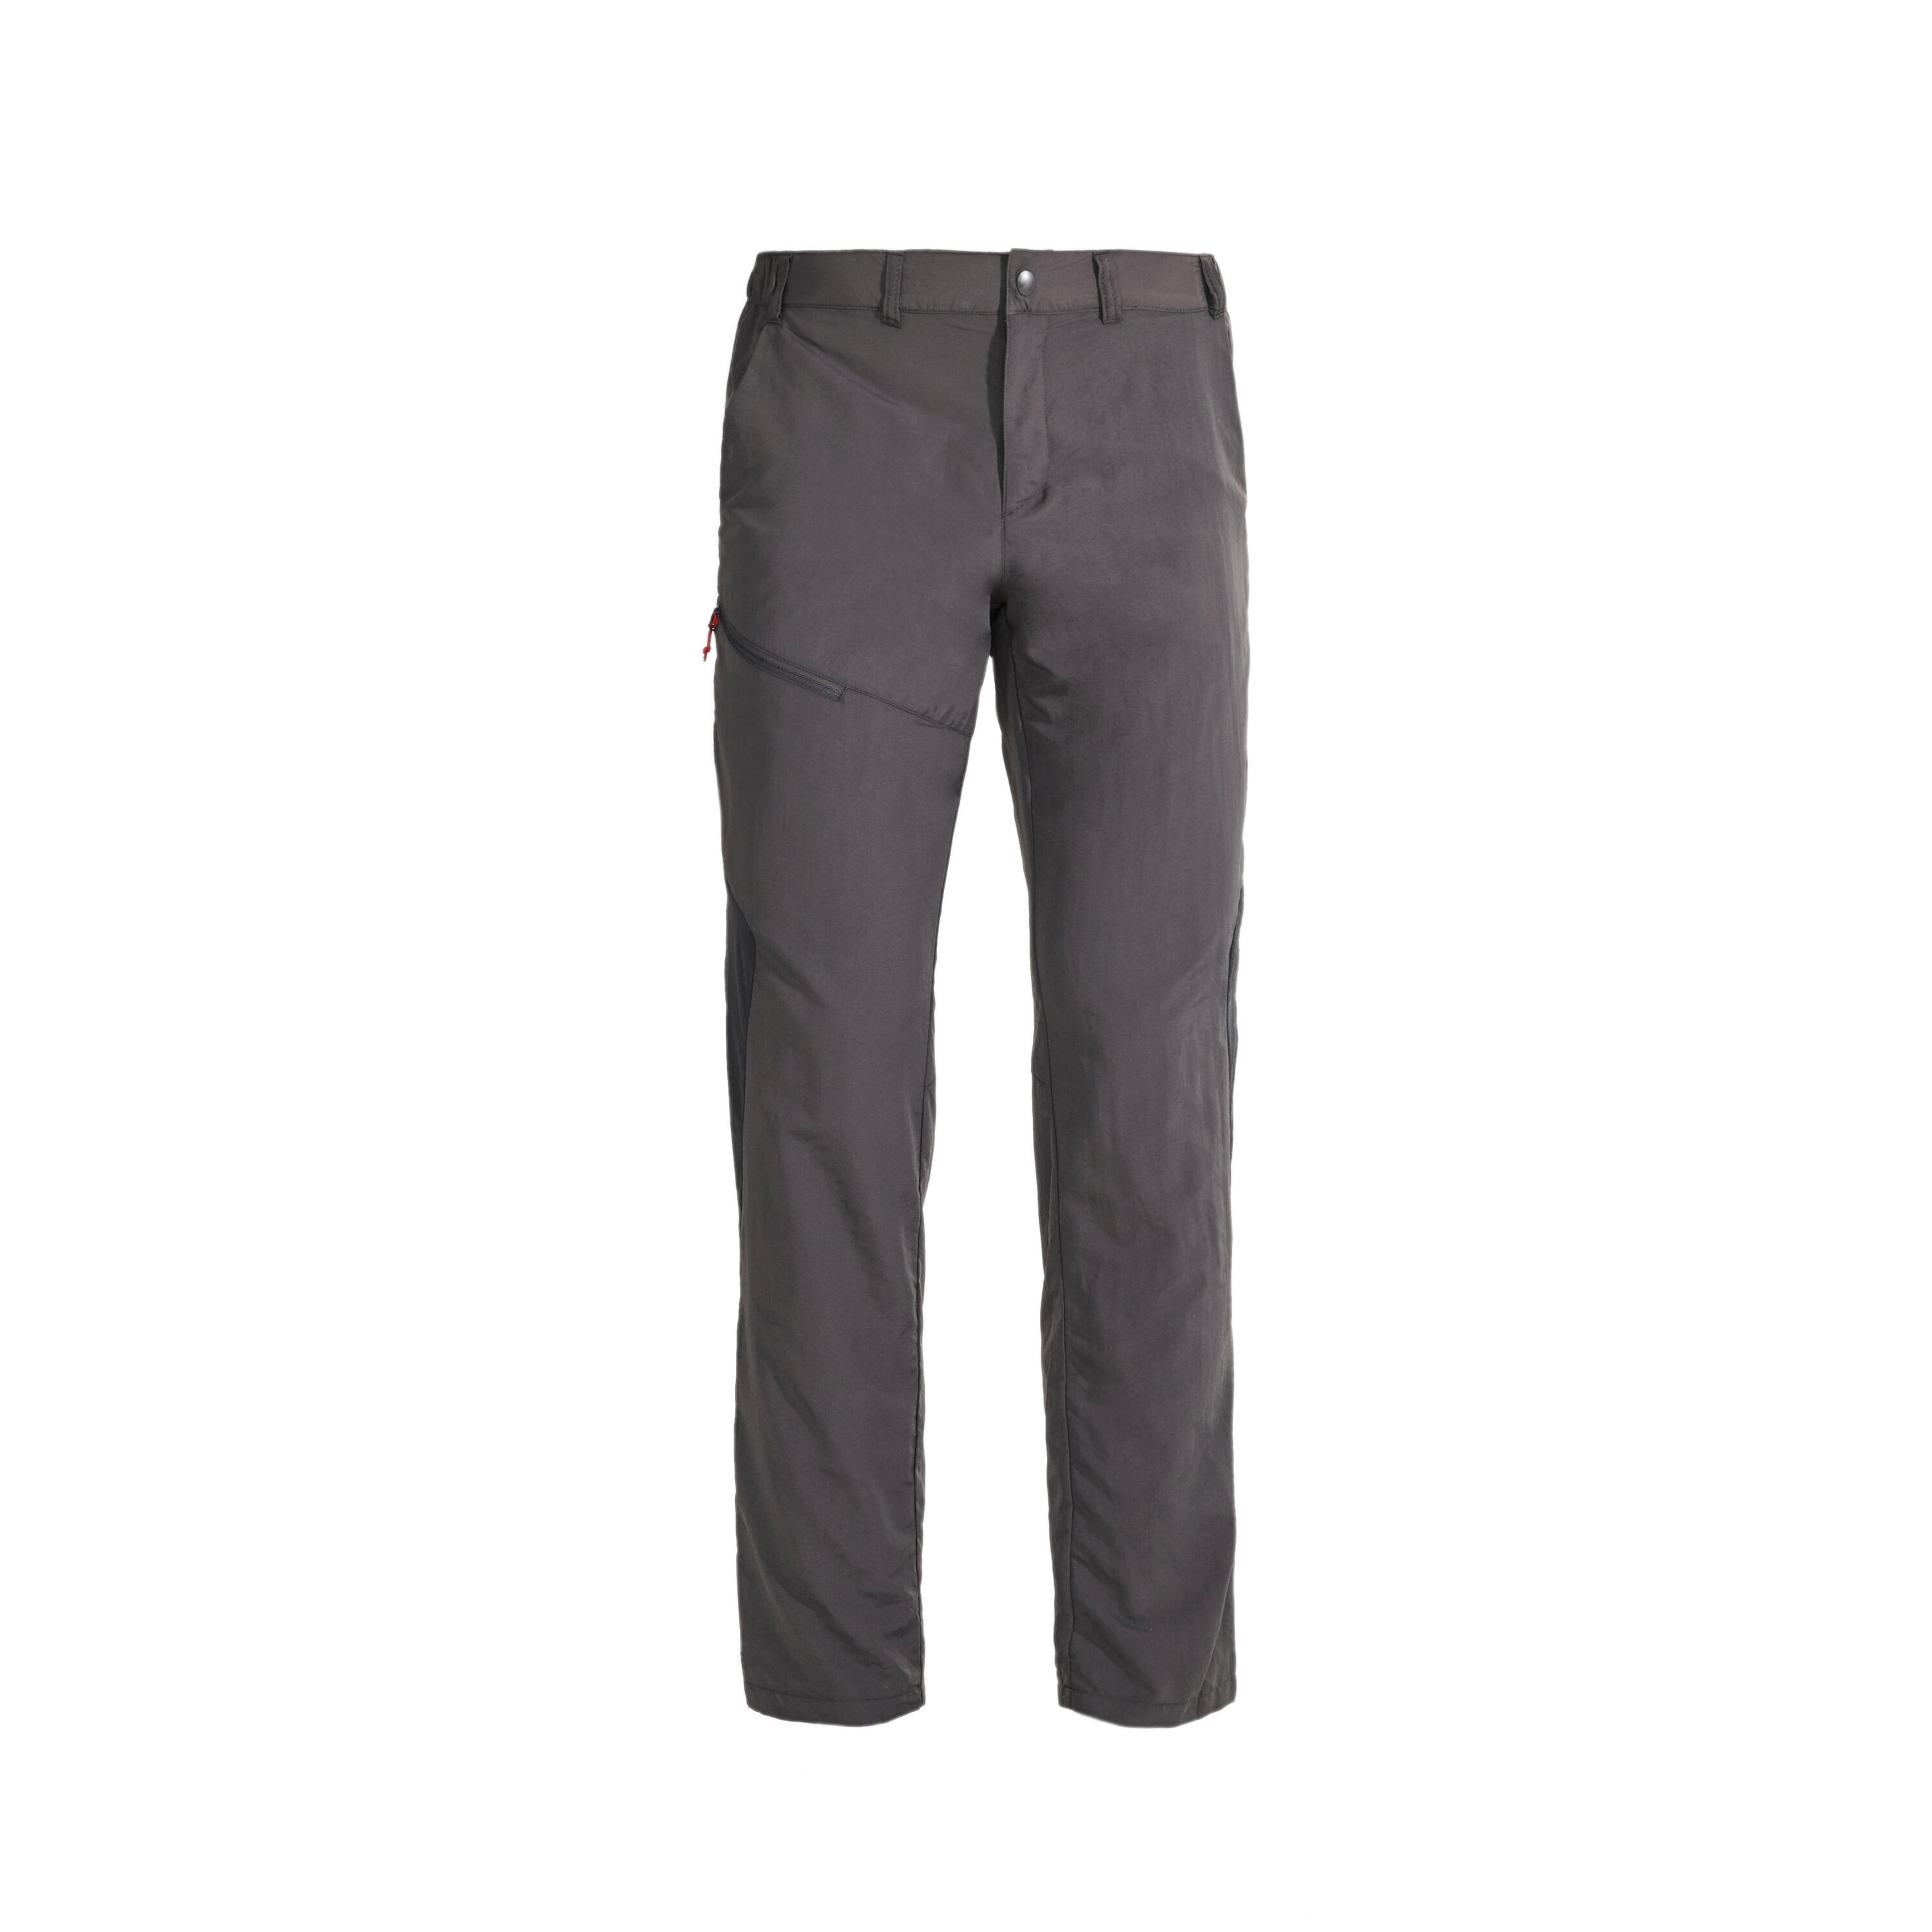 Men's Hiking Trousers - MH100 7/10